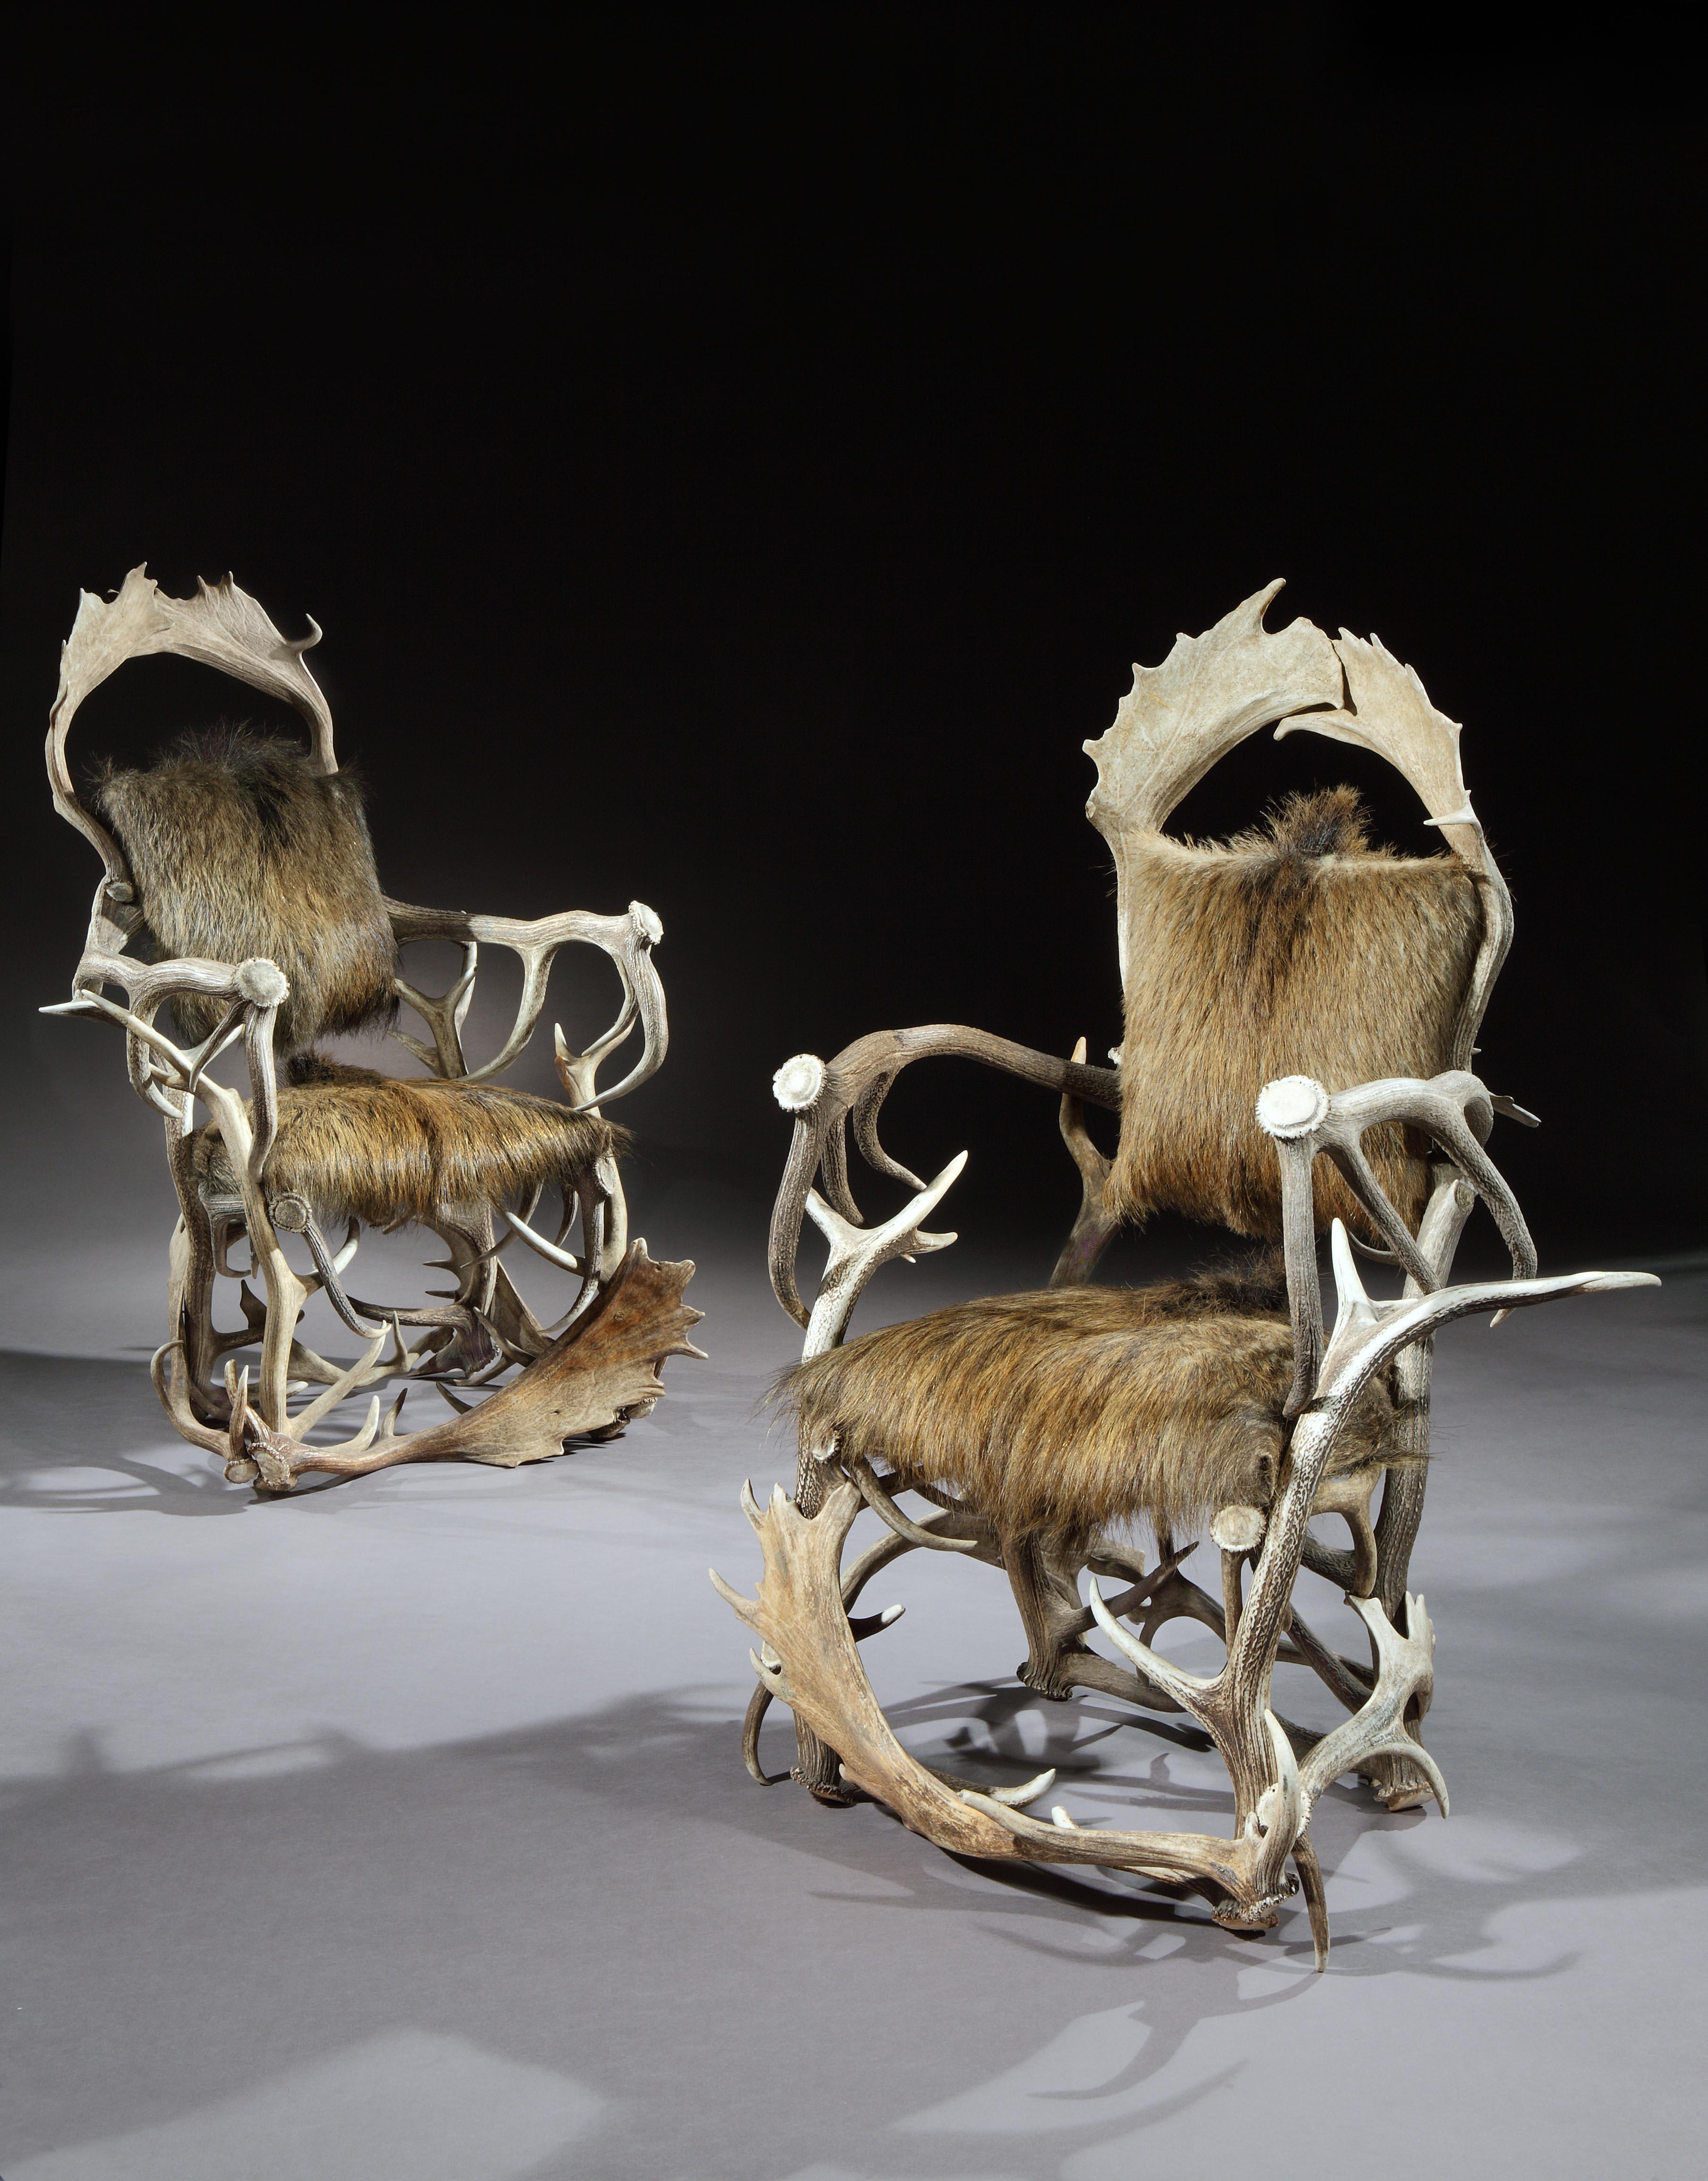 Pairs of hunting trophy armchairs are exceptionally rare. This pair are also unusual because they are made from a few large antlers giving them a minimalist quality. The fluid form of the antlers creates a sculptural, organic aesthetic. They are